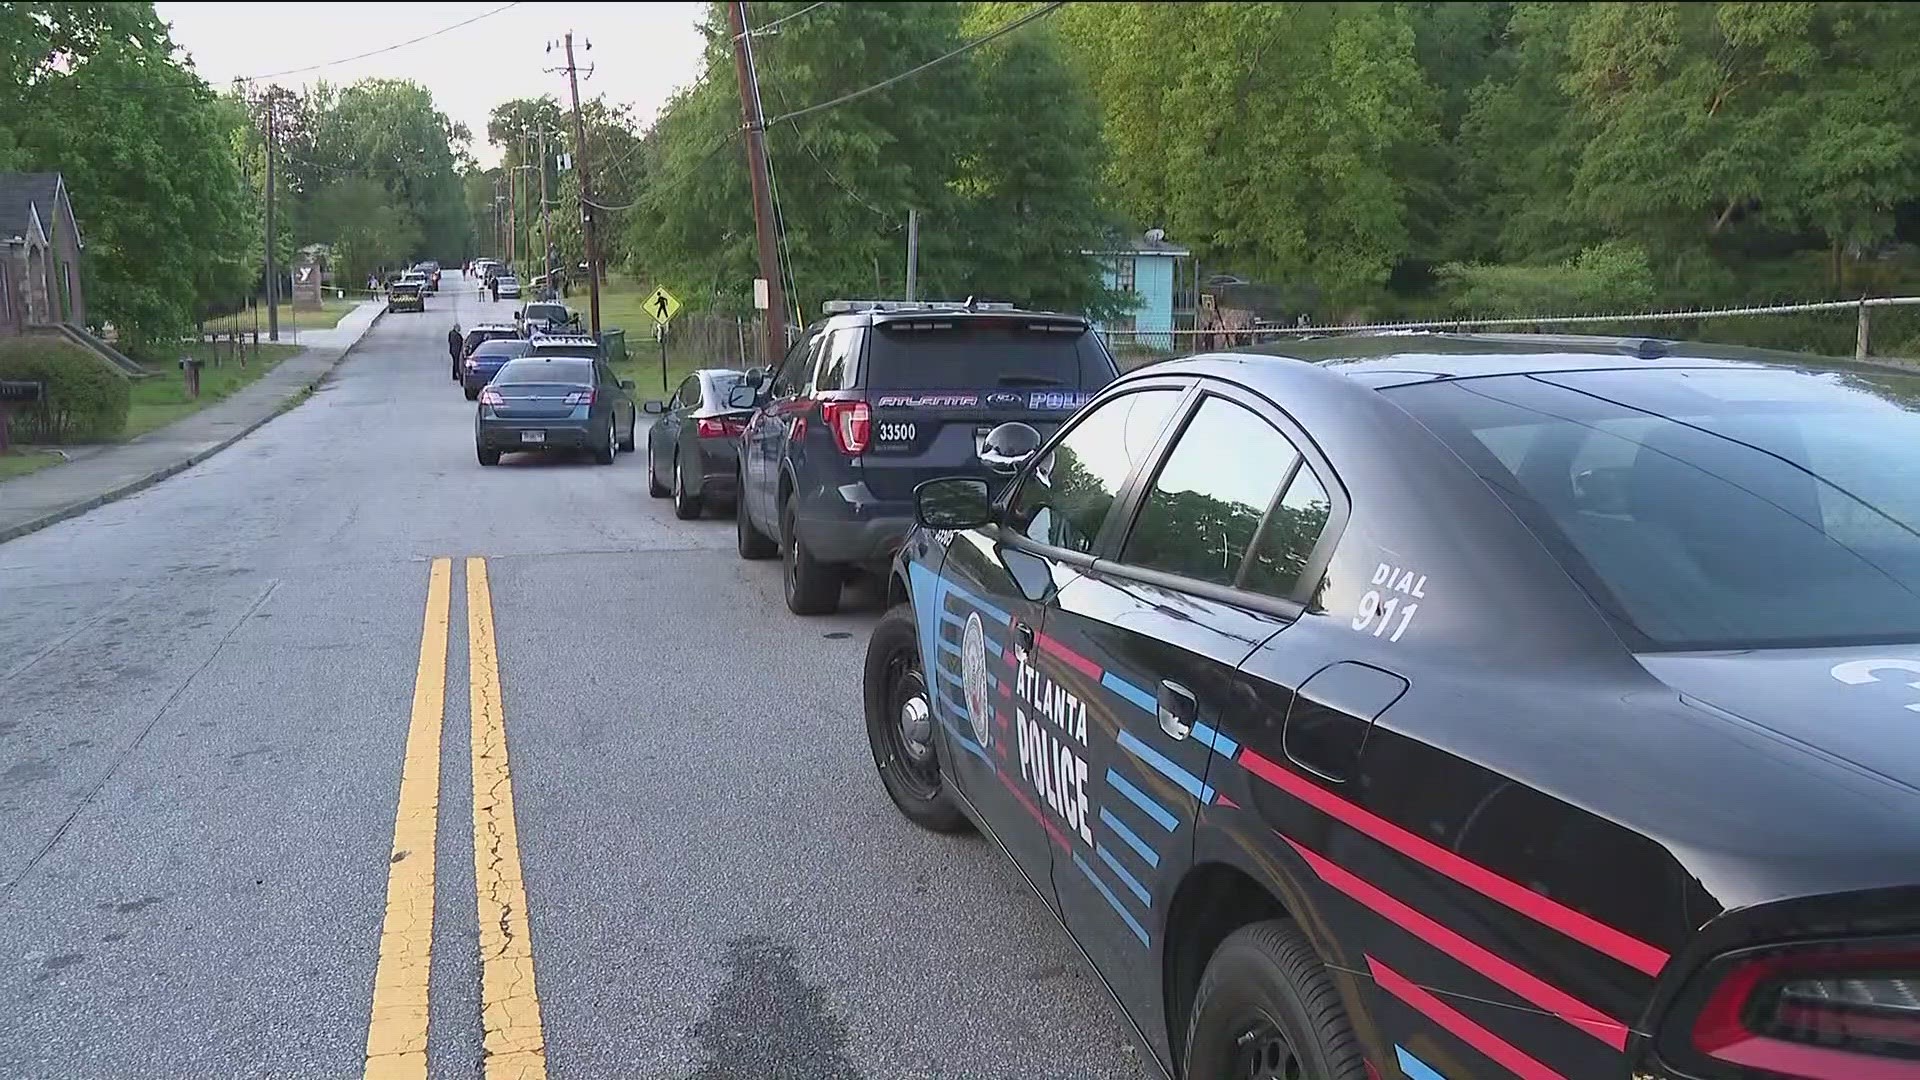 Two men are dead after a triple shooting in Atlanta's Grove Park neighborhood Sunday evening, according to the Atlanta Police Department.